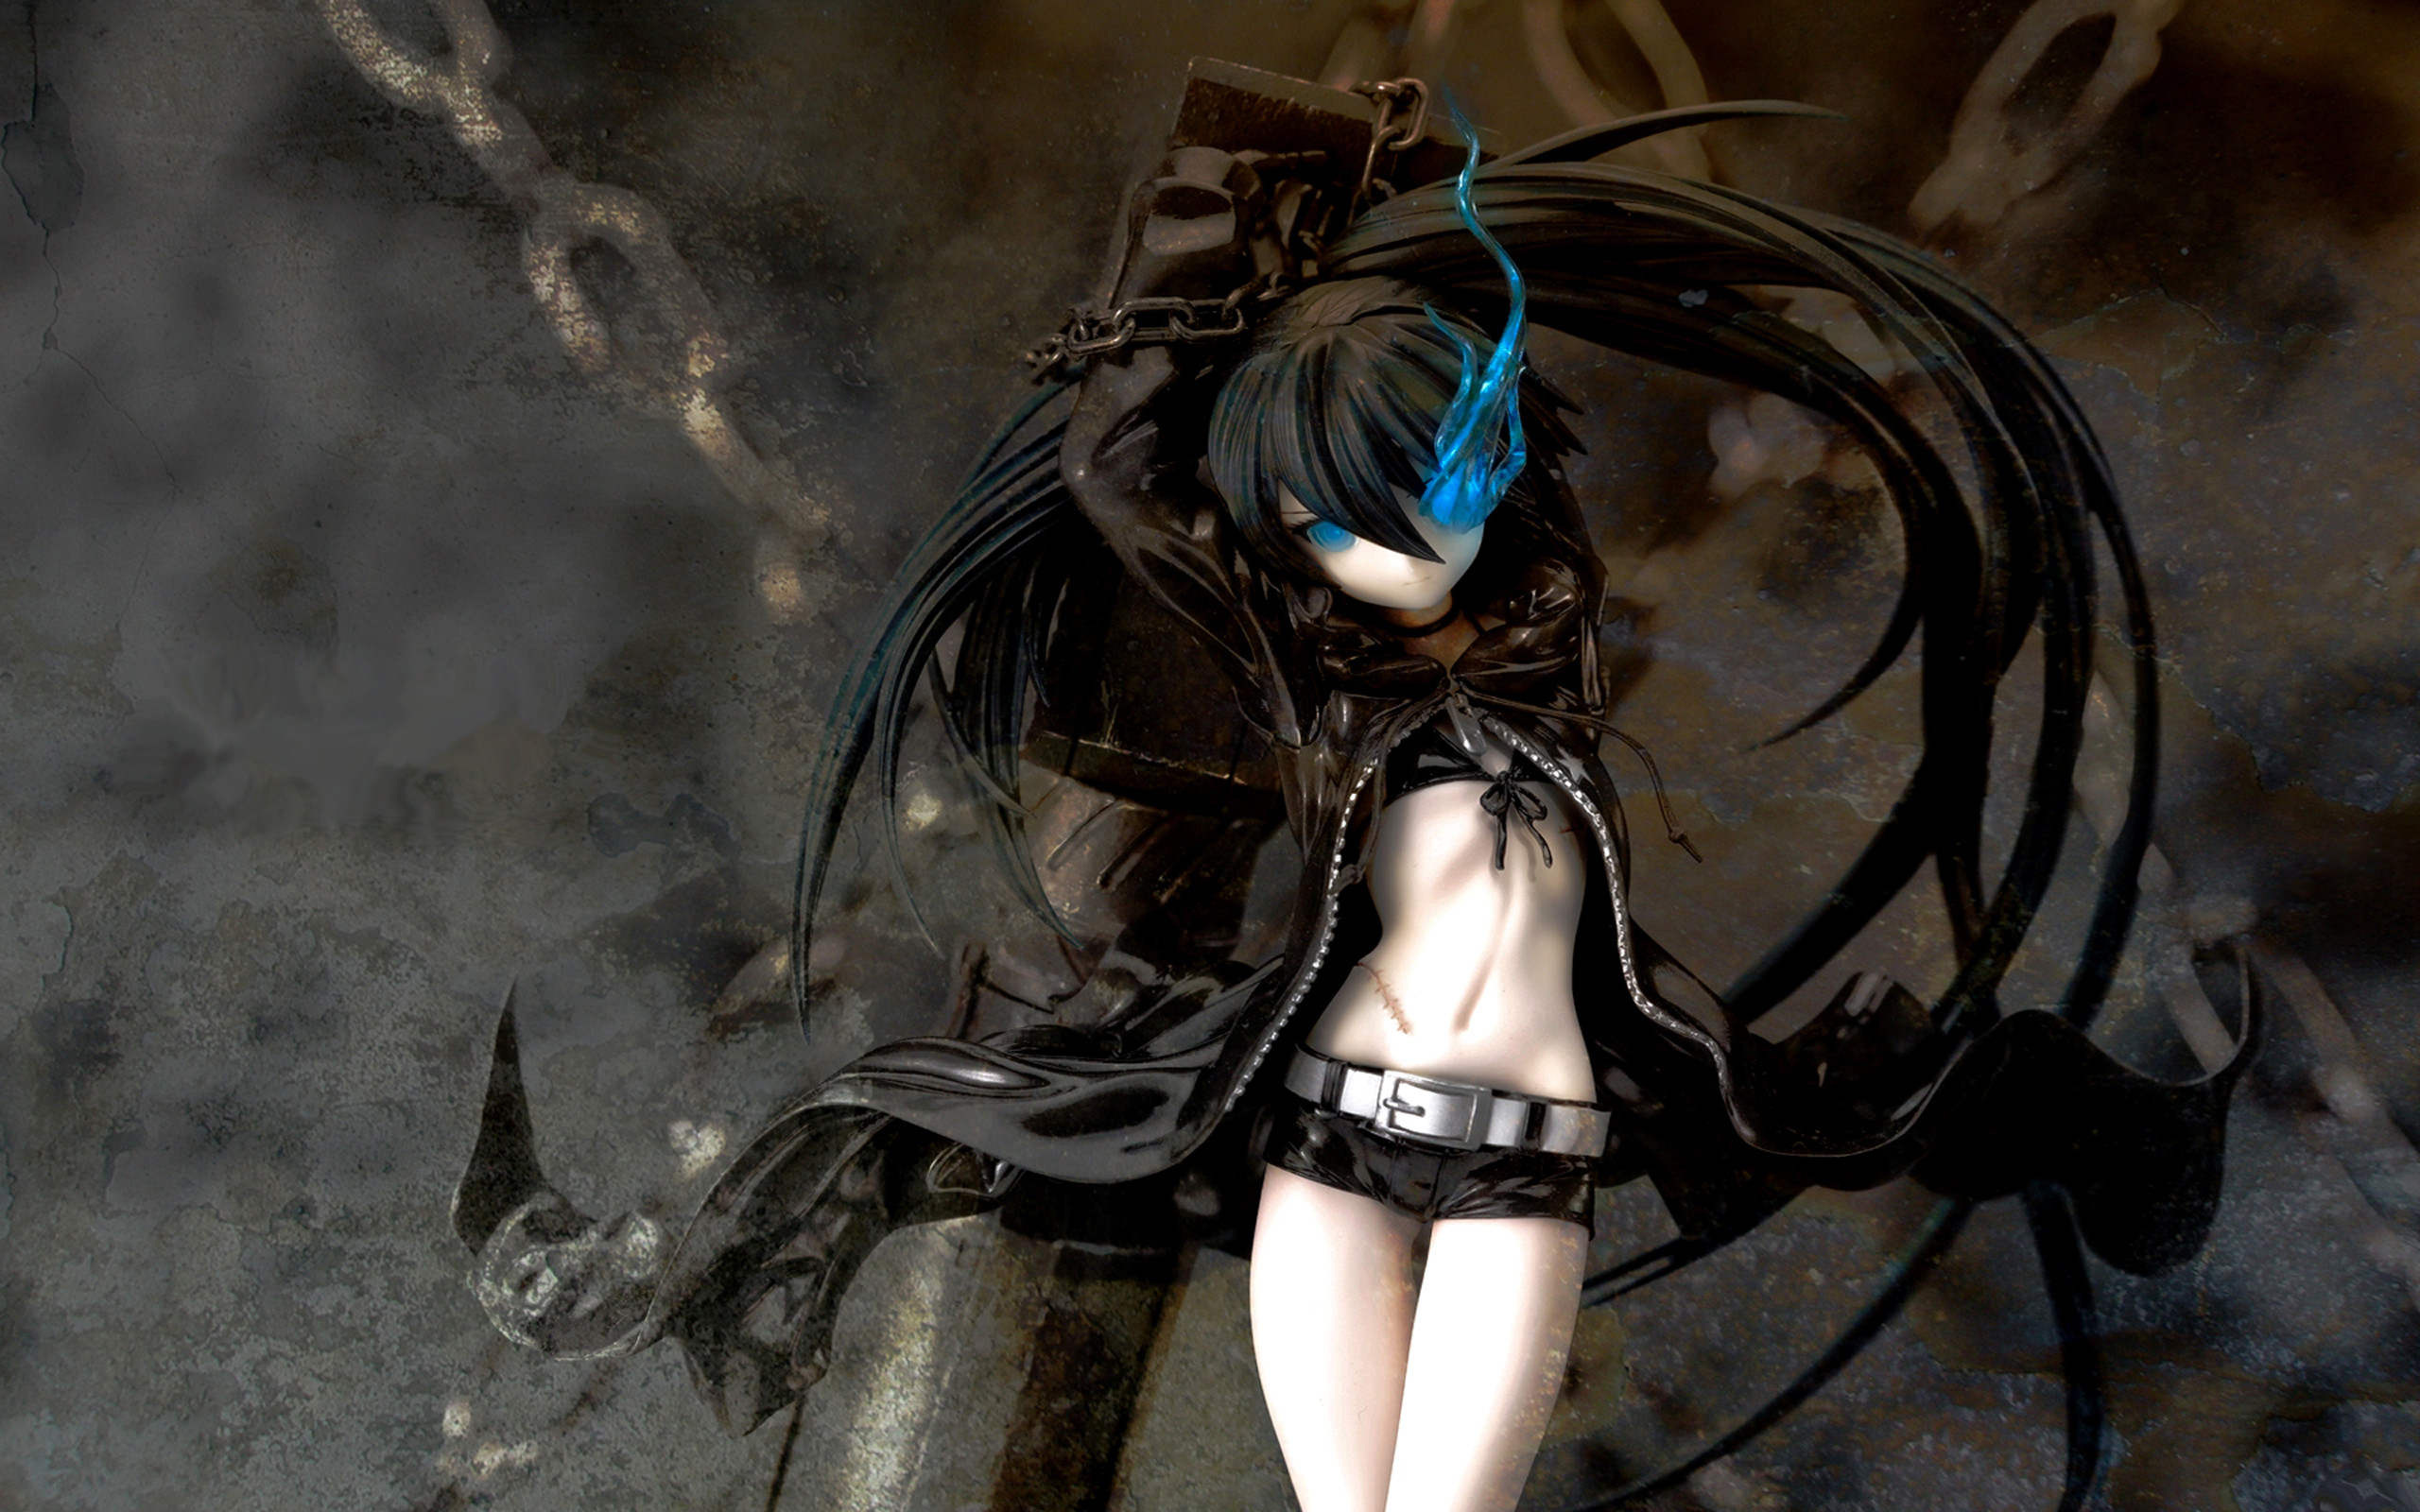 Black rock shooter anime girl wallpaper – hd wallpaper gallery – or wallpapers and backgrounds for desktop or tablet